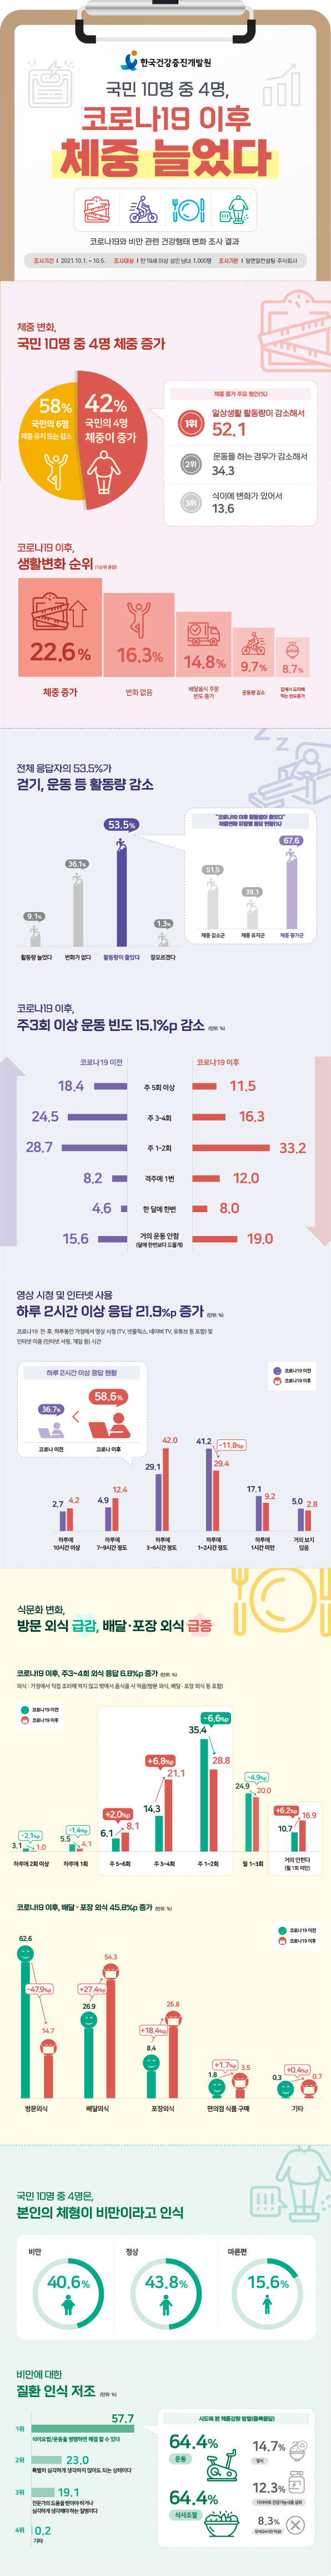 Four out of 10 Koreans gained weight after COVID-19.